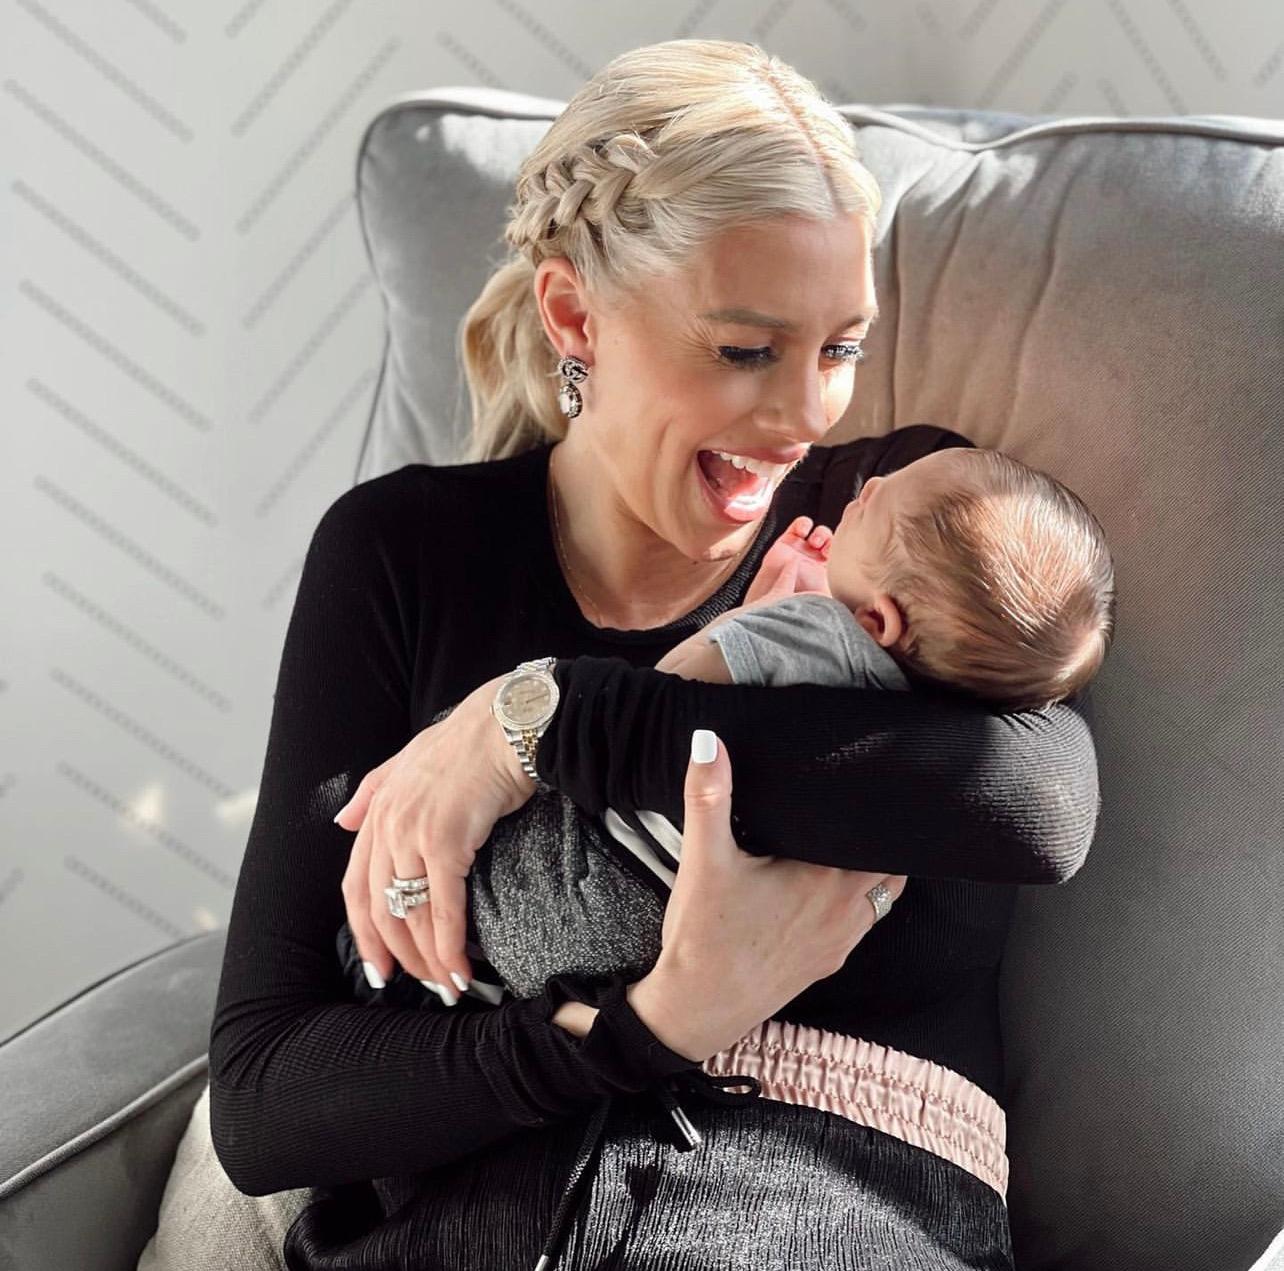 Heather Rae El Moussa Reveals What She Loves 'About Being A Mom To A Newborn'